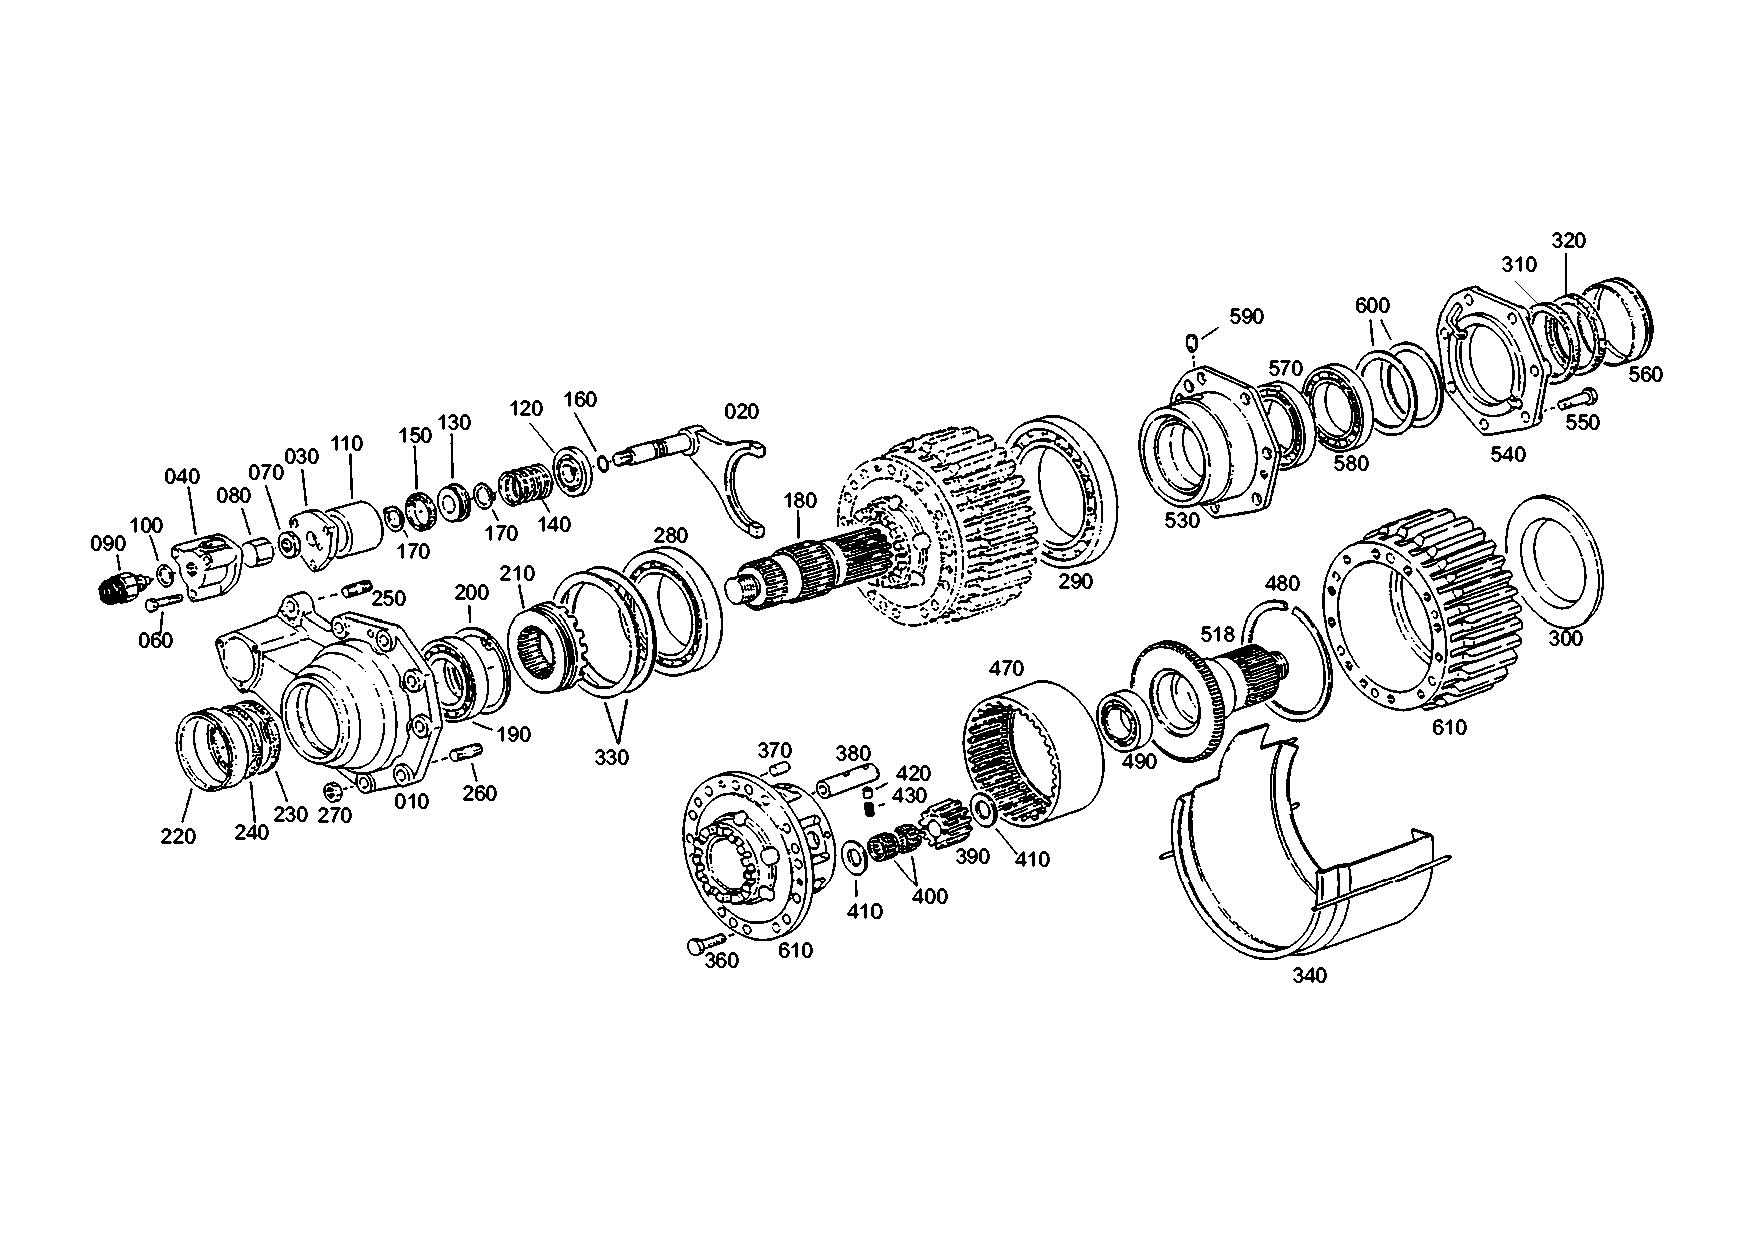 drawing for LUNA EQUIPOS INDUSTRIEALES, S.A. 199118250222 - BEARING HOUSING (figure 3)